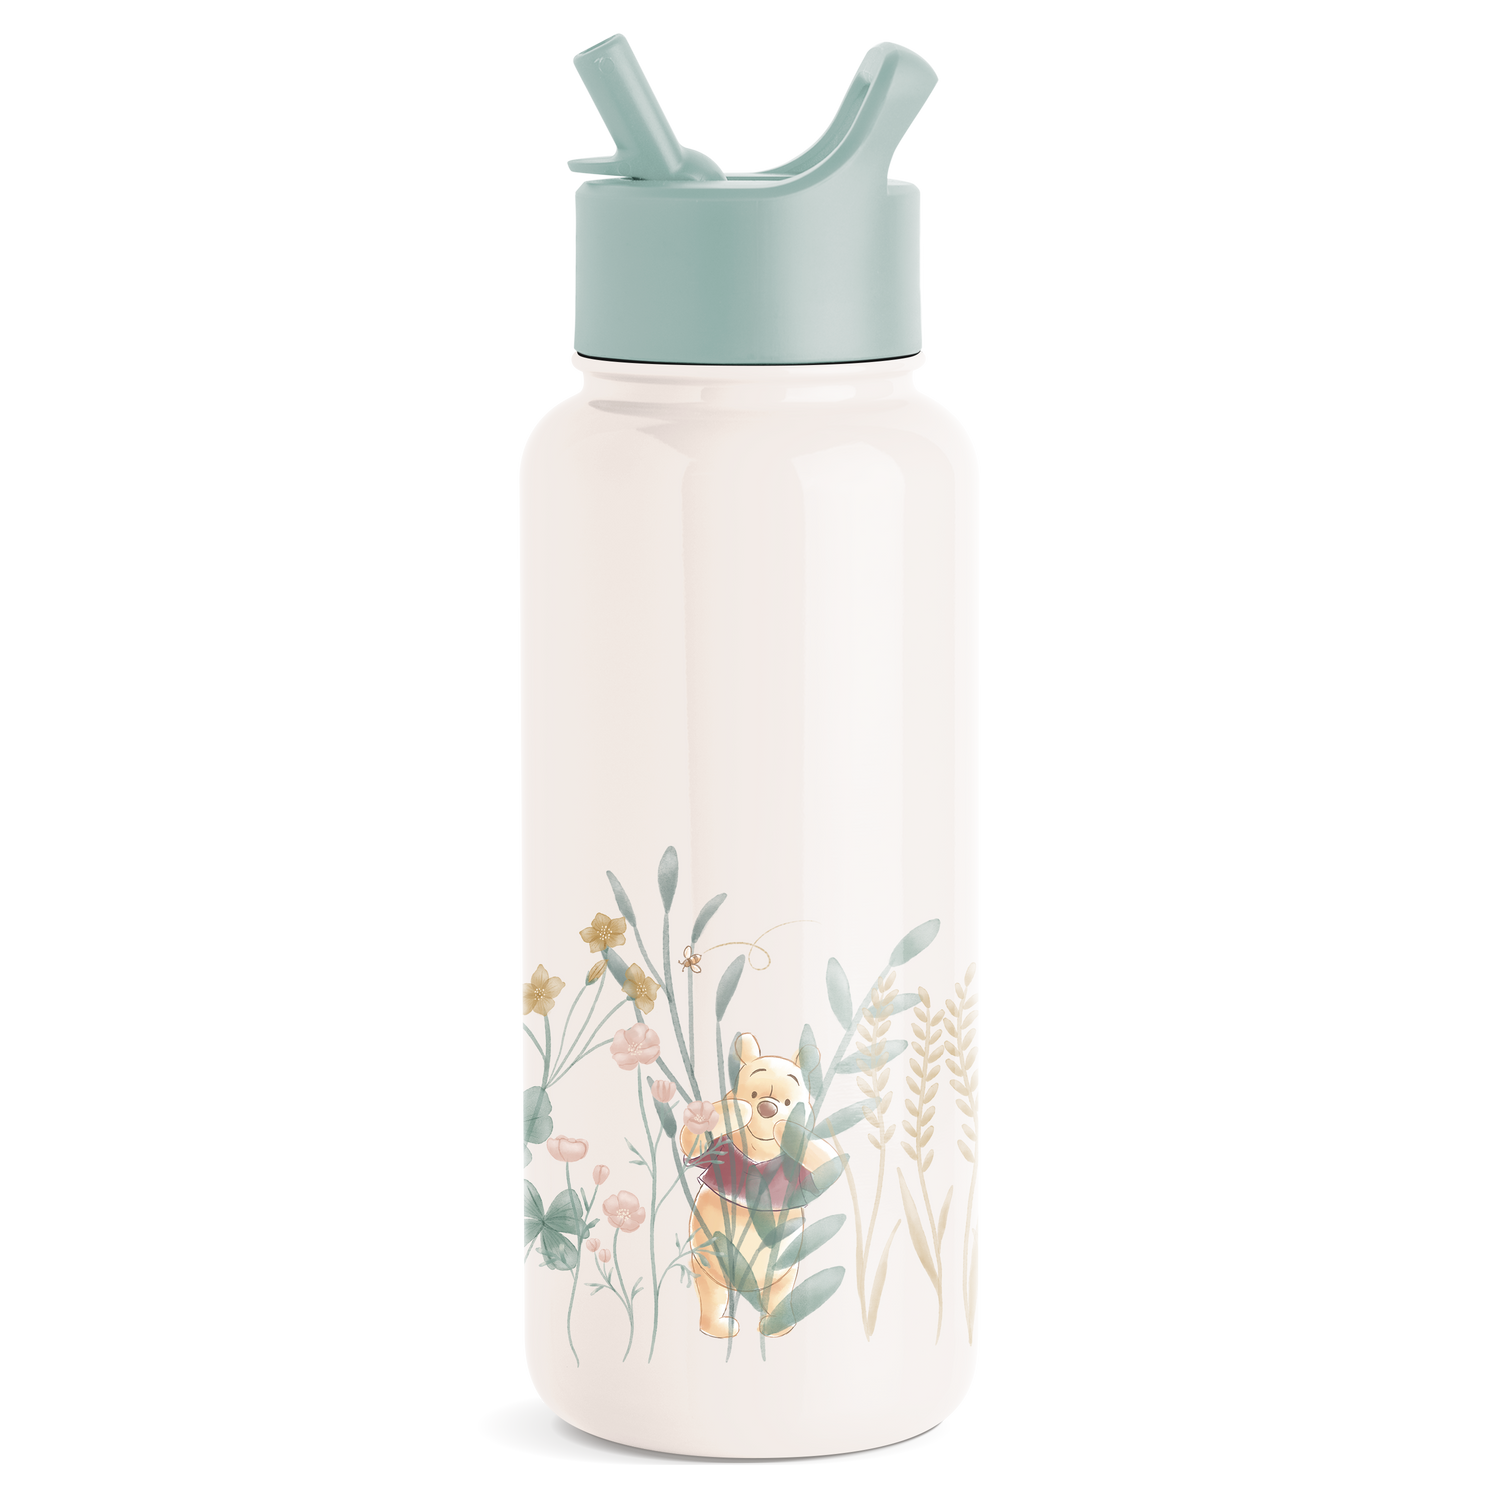 Disney Insulated Water Bottle/Tumbler with Built-In Straw – Simple